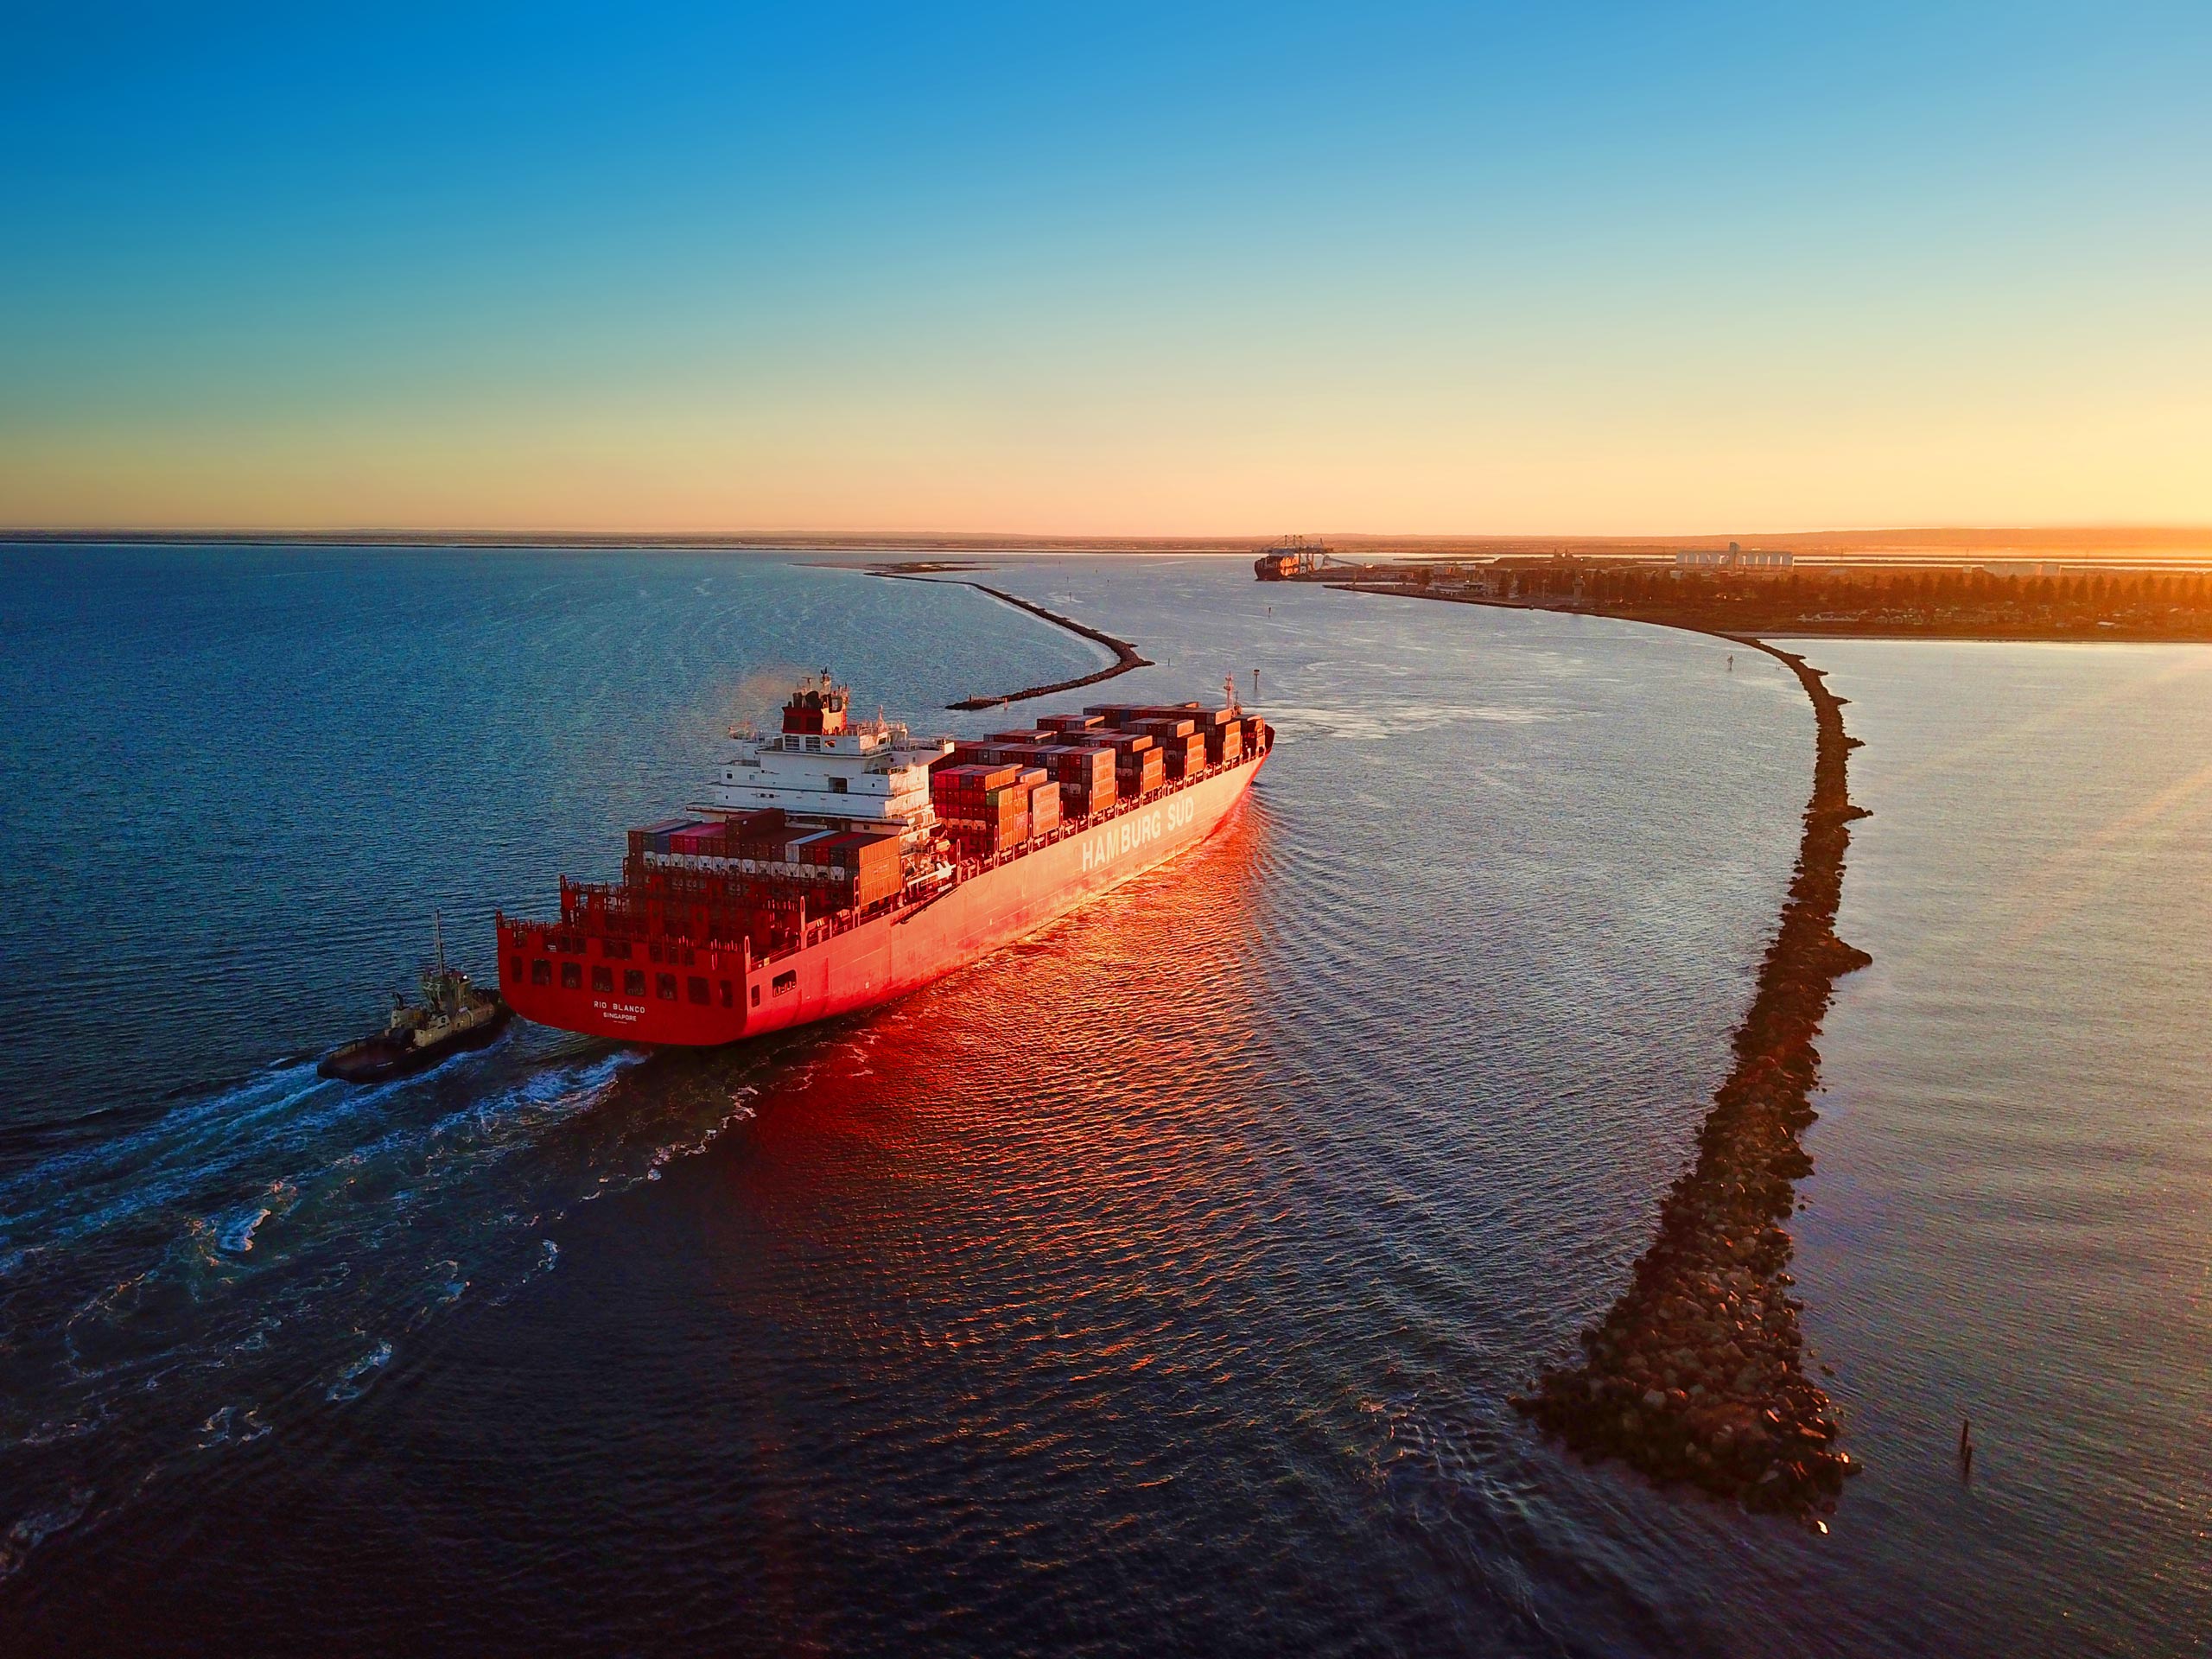 First of the “big” container ships arrives in SA after $45 million shipping channel upgrade